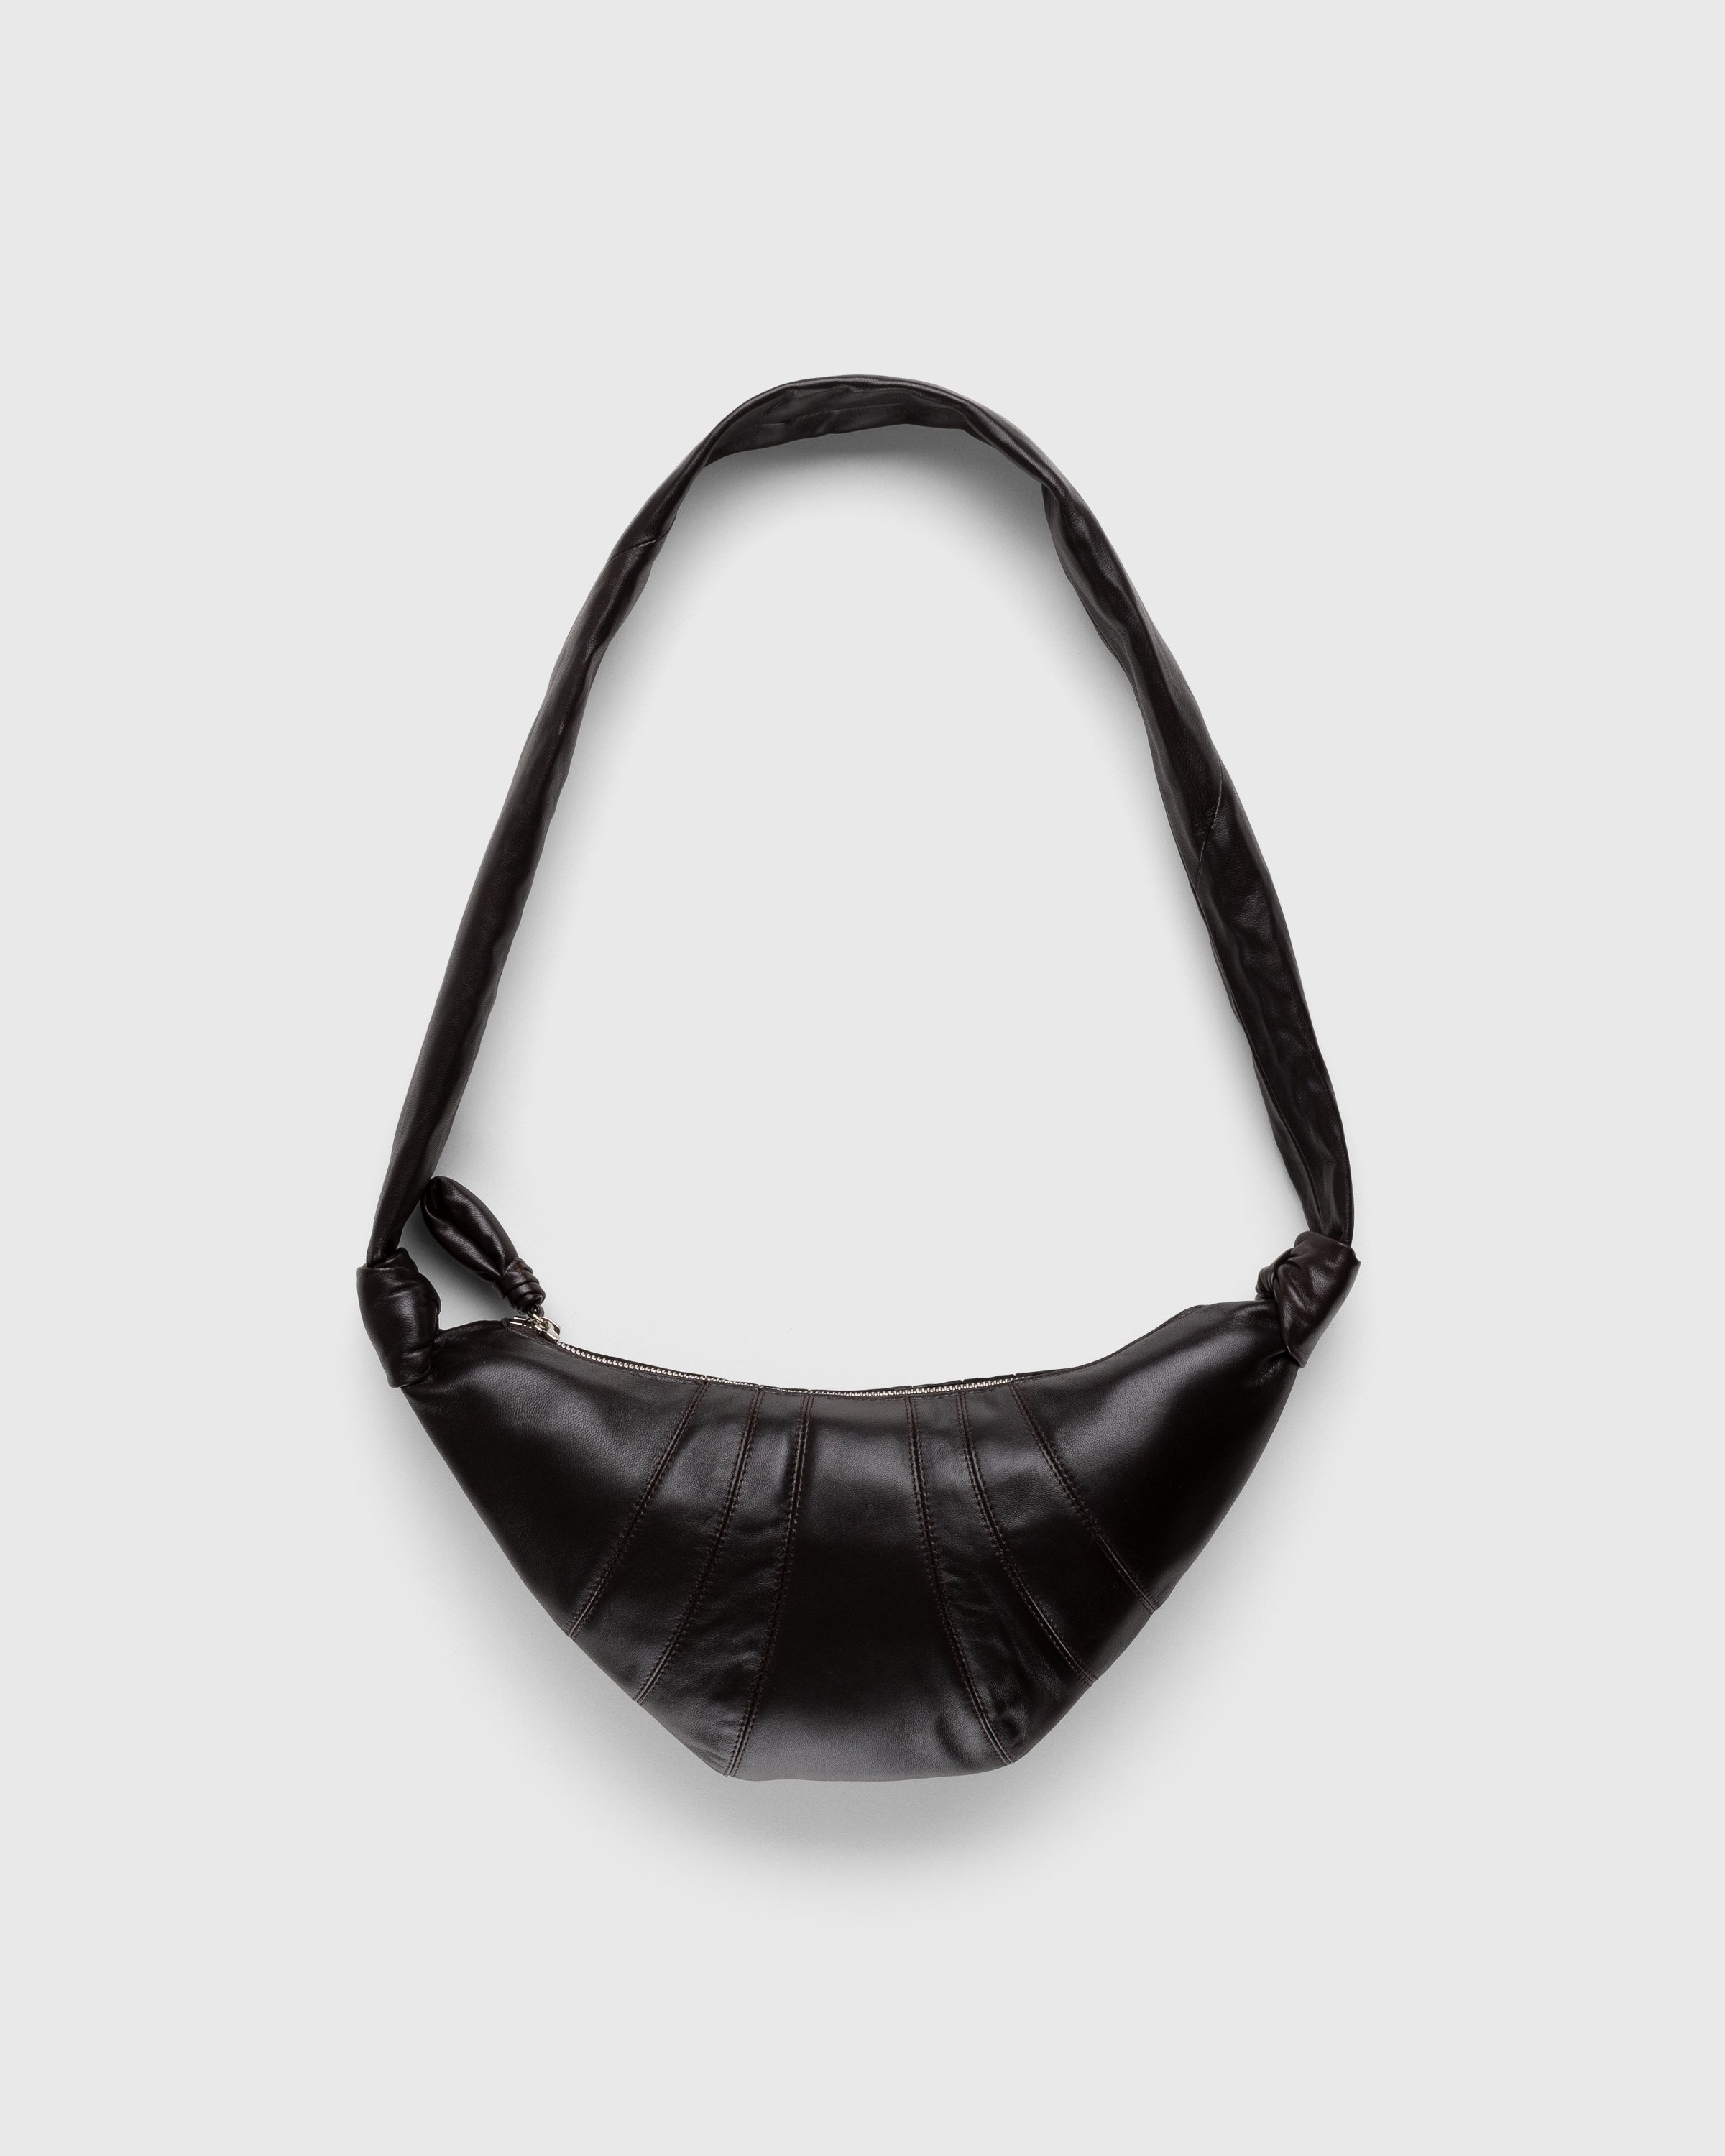 Lemaire x Highsnobiety – Not In Paris 4 Small Croissant Bag Dark Chocolate - Bags - Black - Image 1